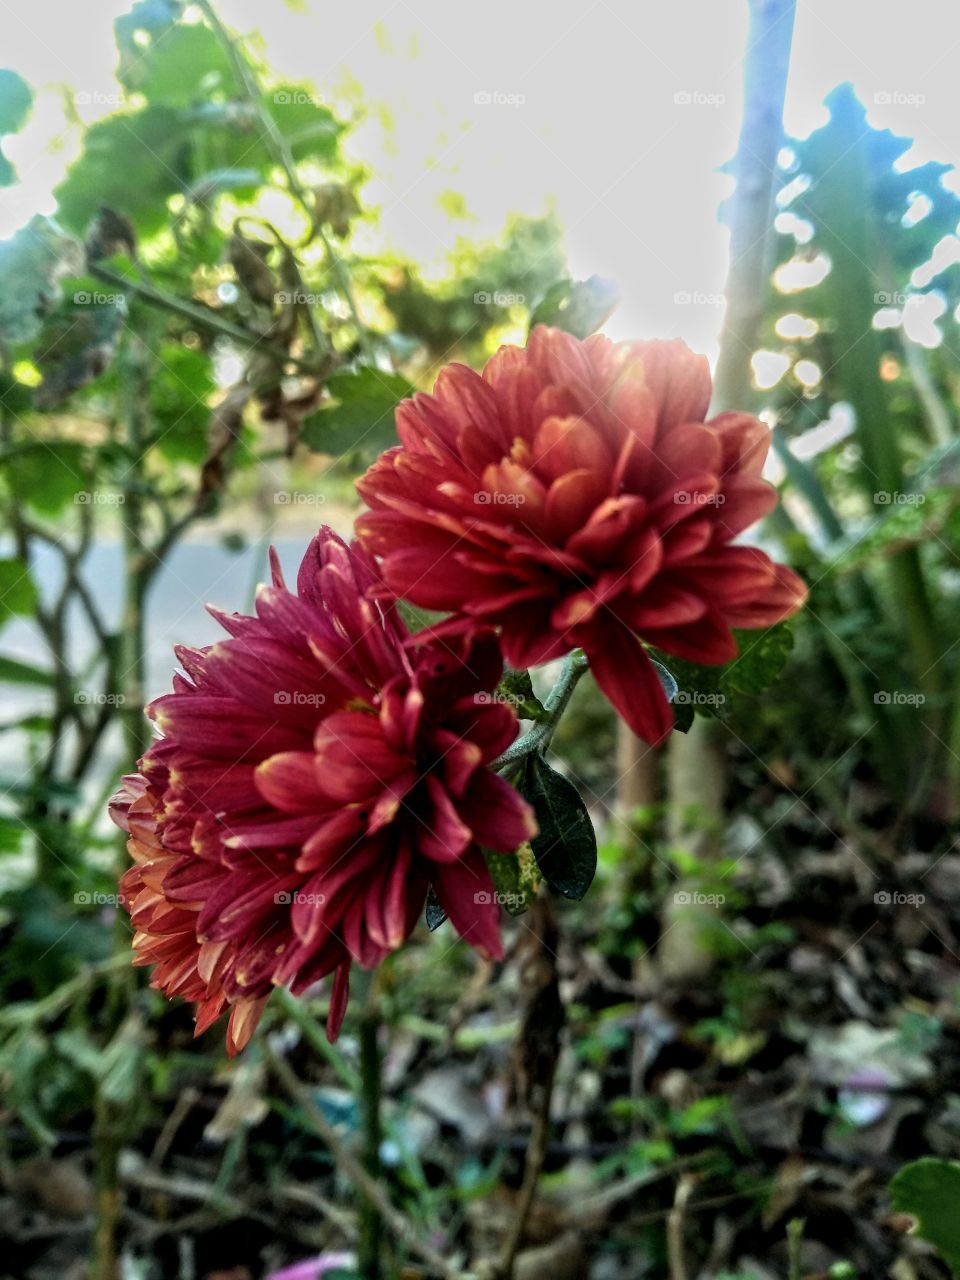 Beautiful flowers. Delicated flowers. Red flowers. Garden./ Flores lindas. Flores delicadas. Flores vermelhas...